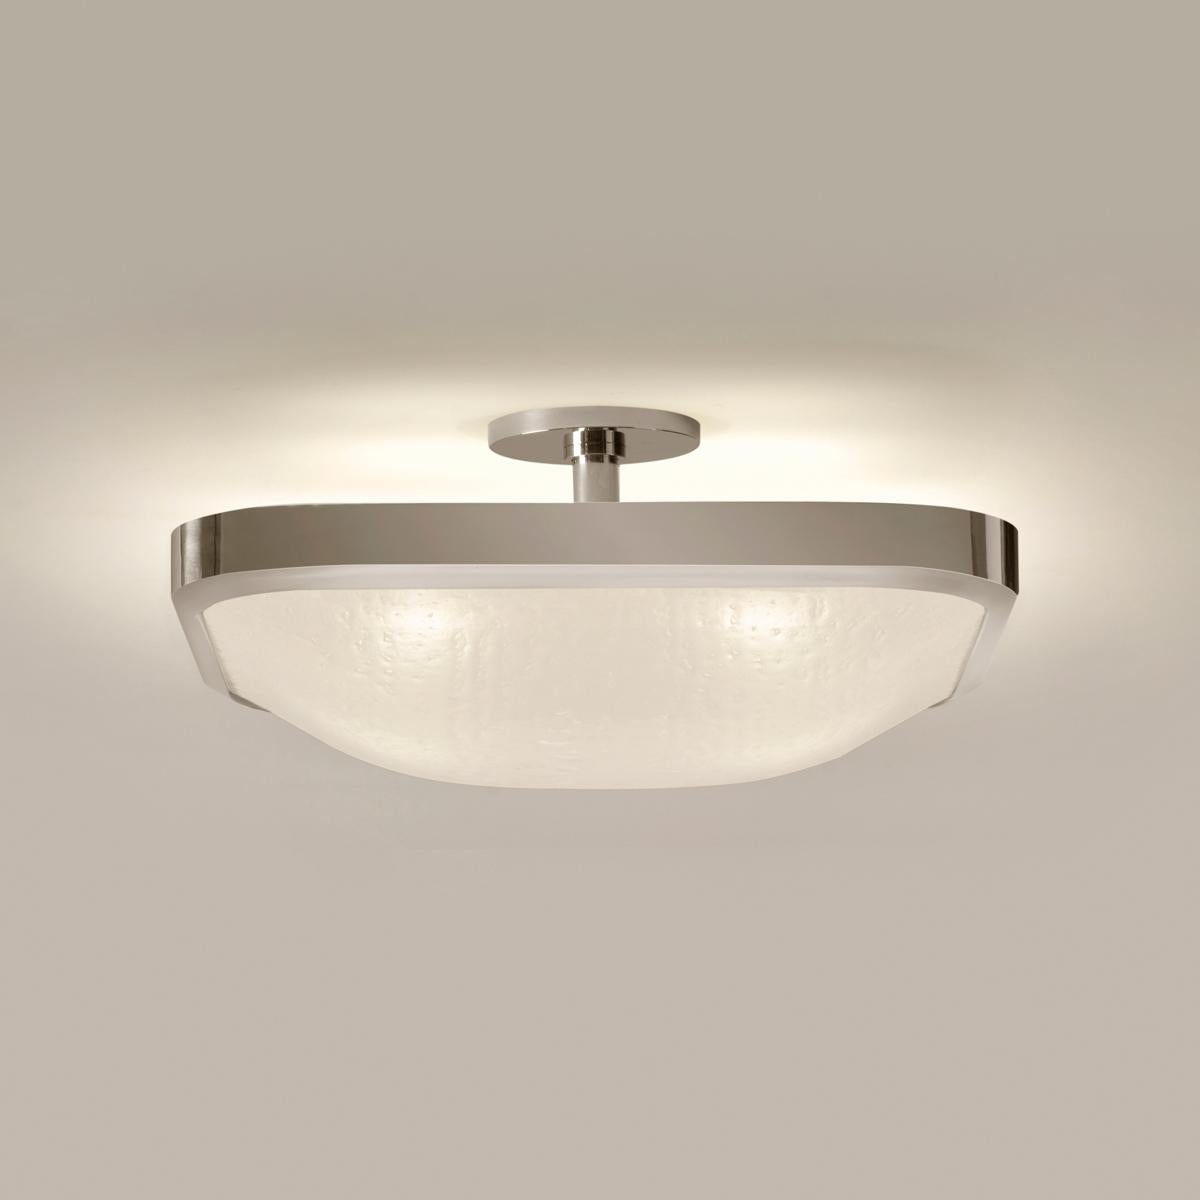 Uno Square Ceiling Light by Gaspare Asaro-Satin Brass Finish In New Condition For Sale In New York, NY